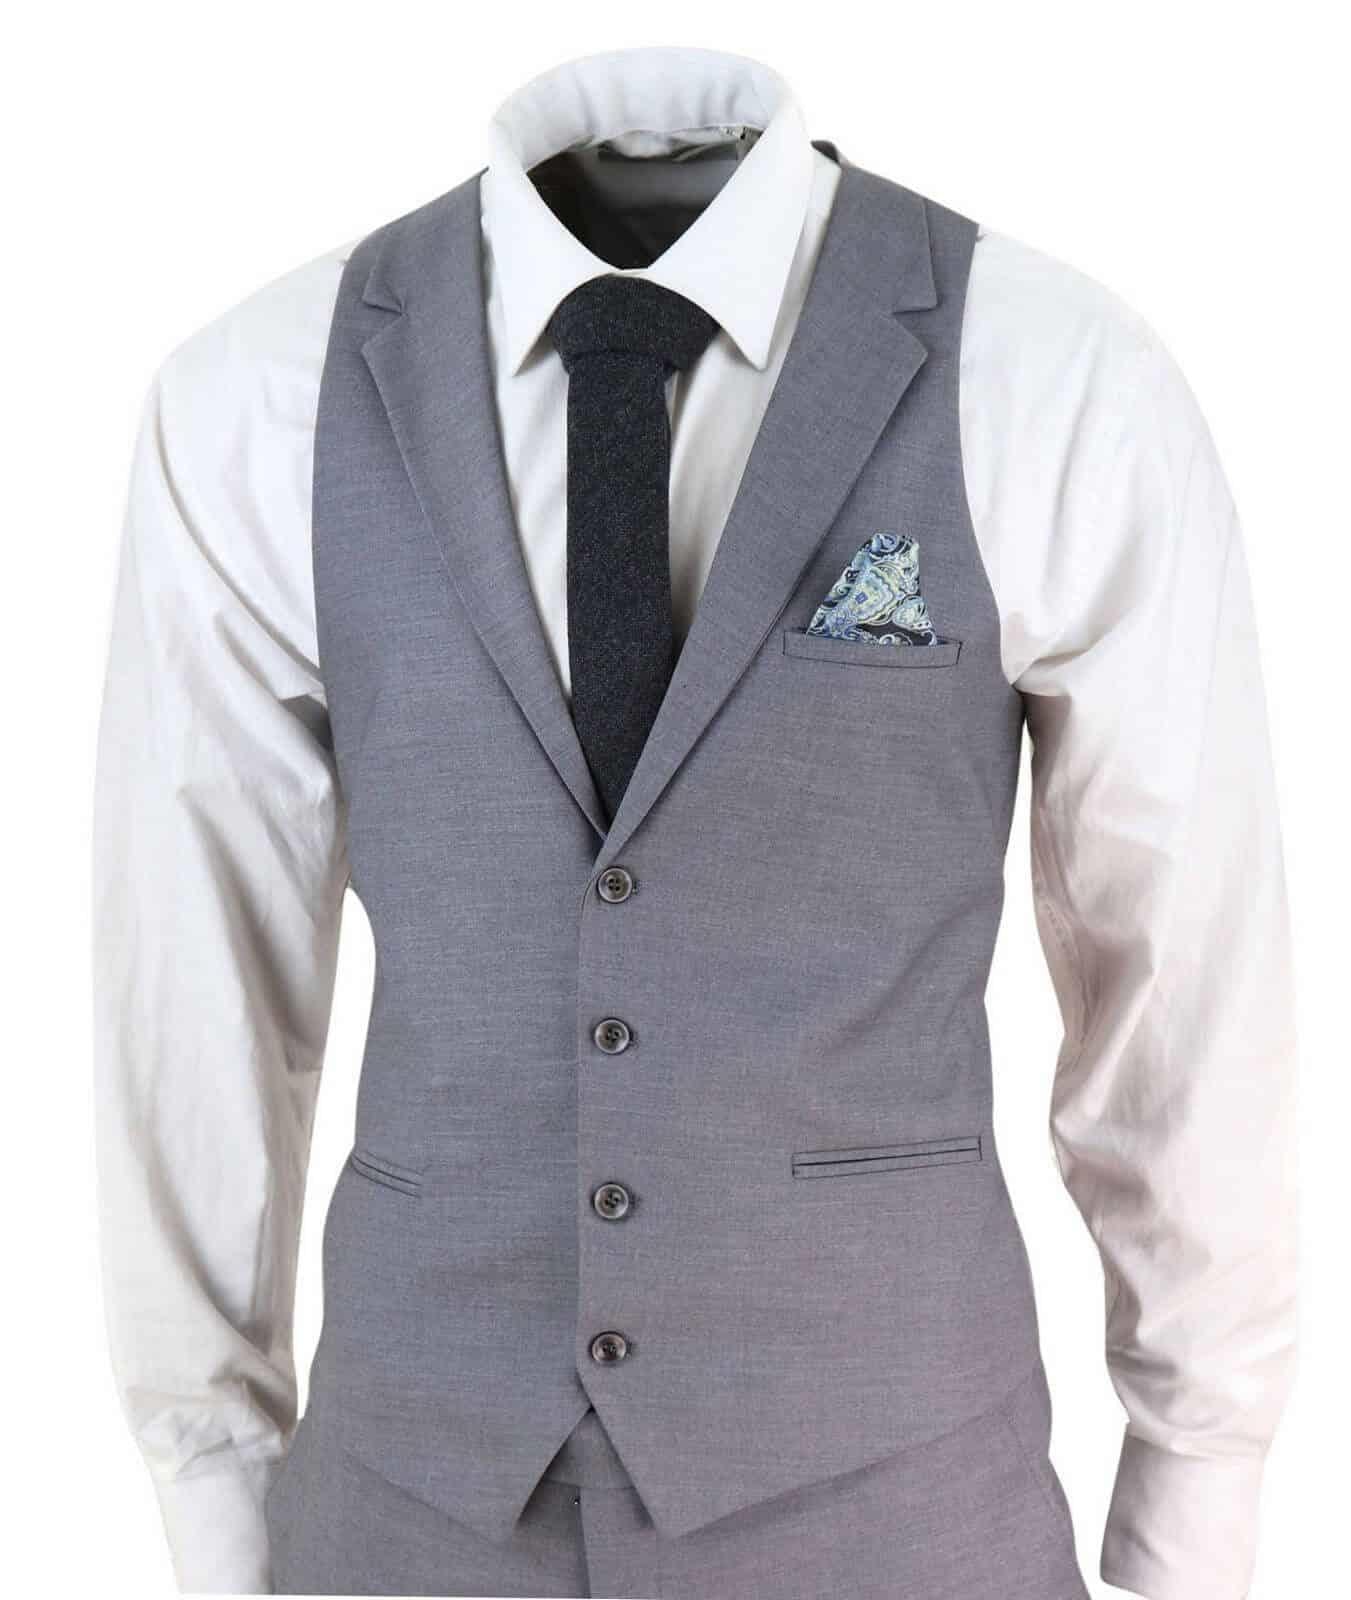 New Mens 3 Piece Suit Plain Grey Classic Tailored Fit Smart Casual 1920s Formal